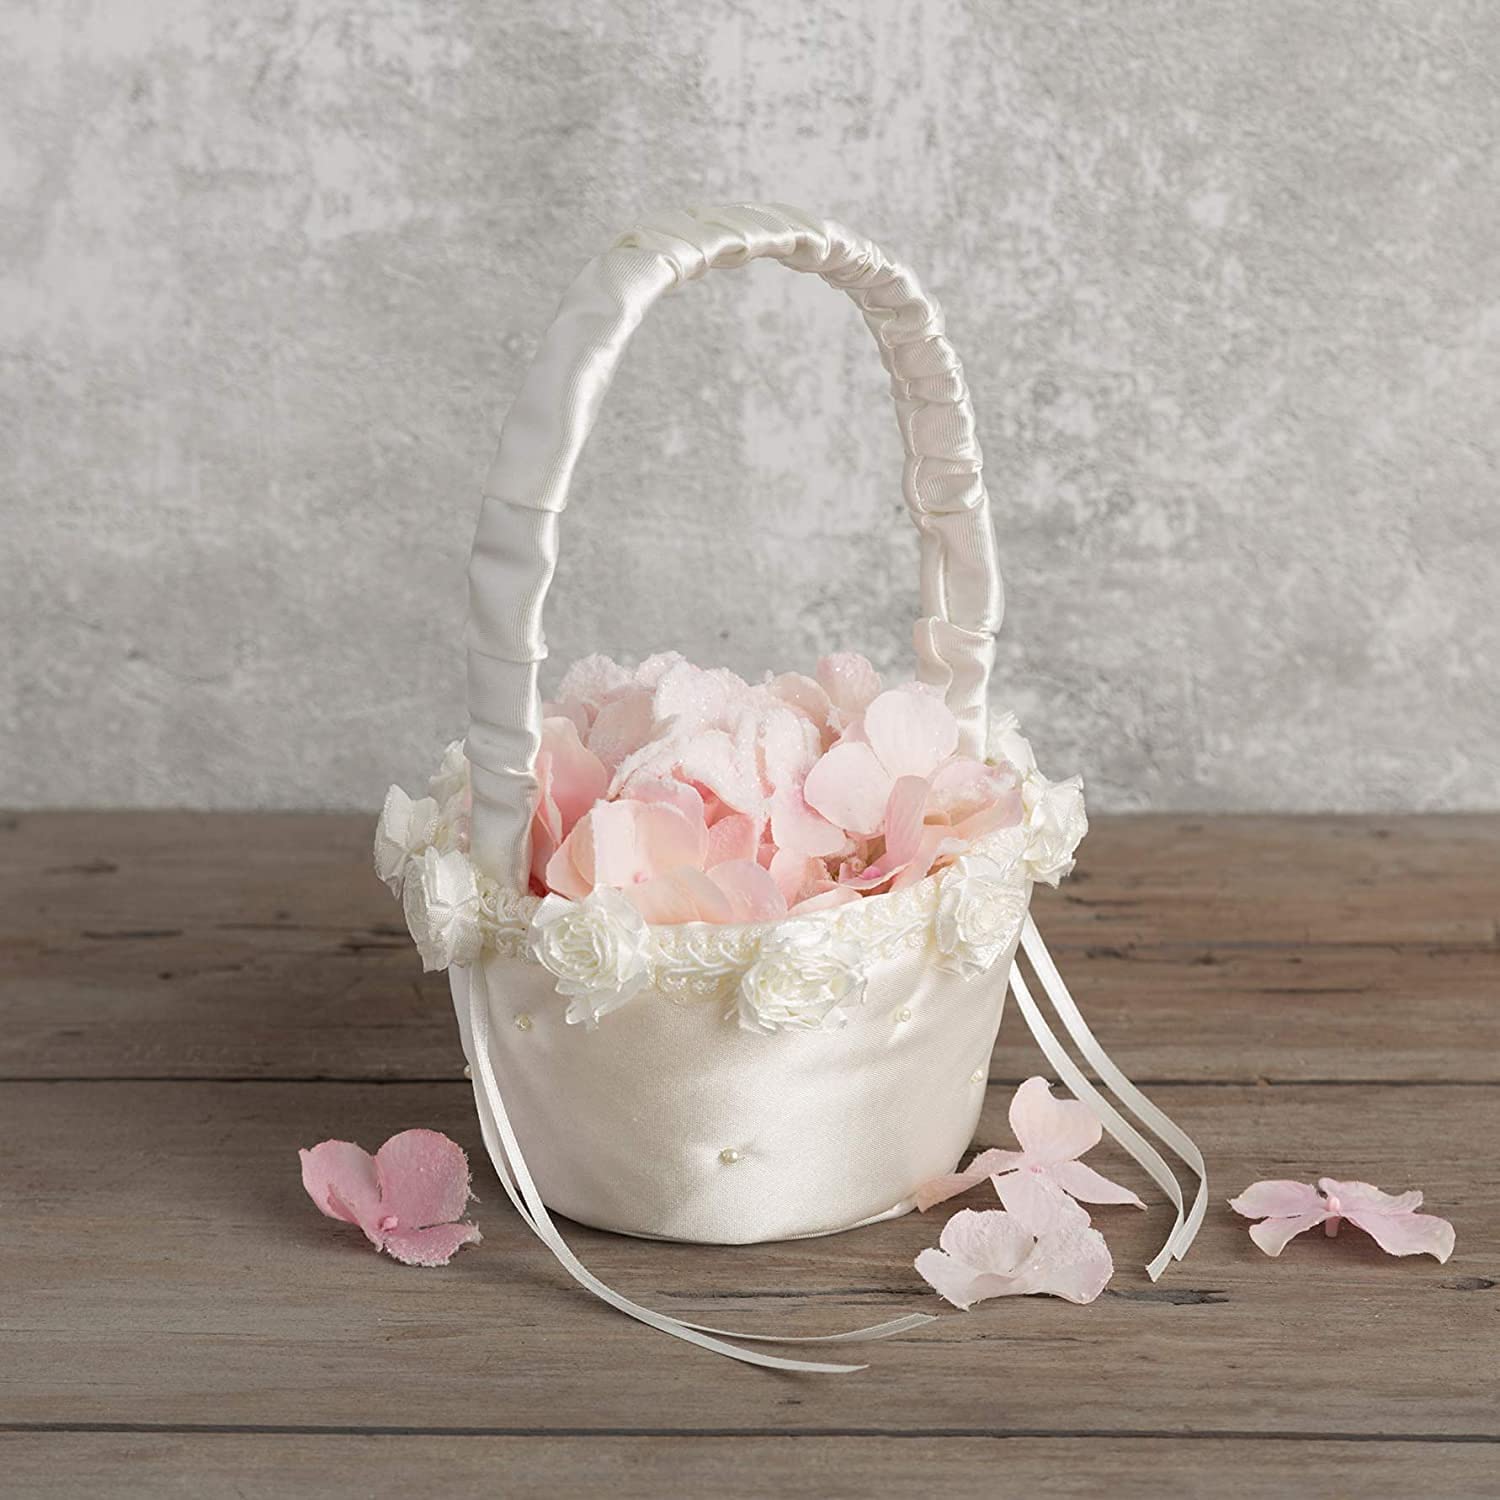 Simplicity 5073062010 Small Flower Girl Basket for Weddings and Other Celebrations, 3.5'' W x 5'' L x 7.5'' H, White Ivory